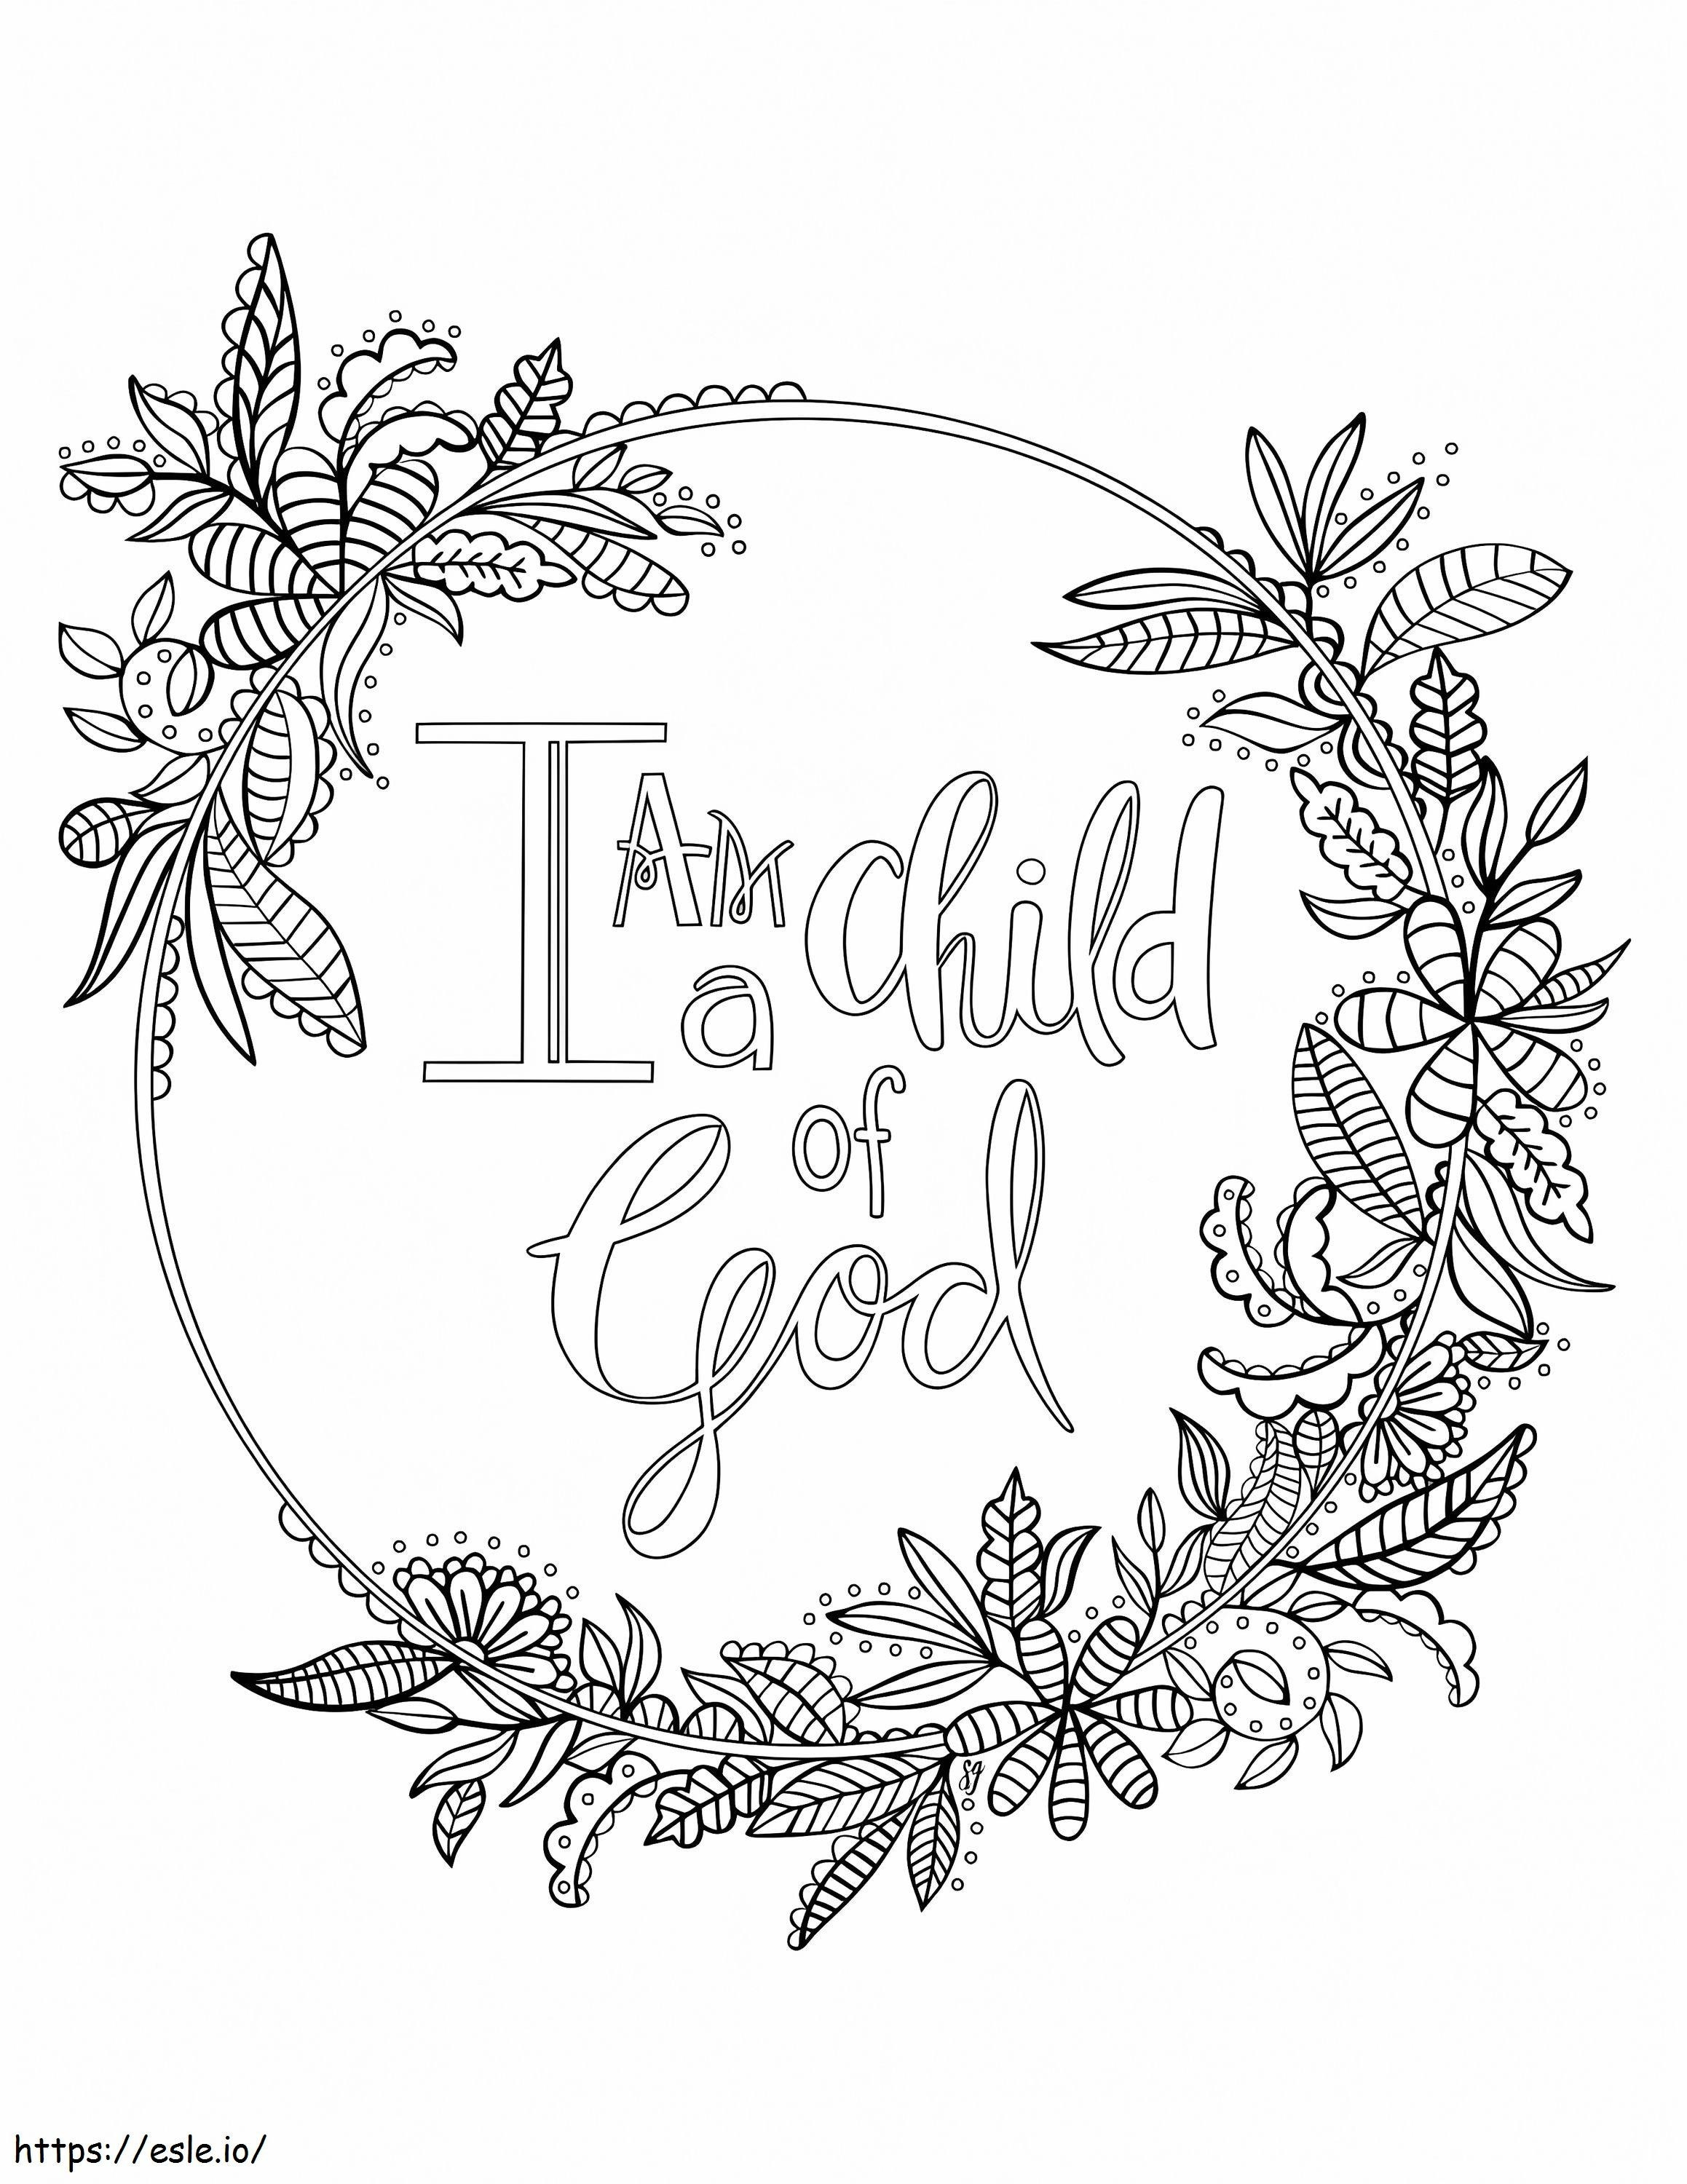 Bible Verse 6 coloring page